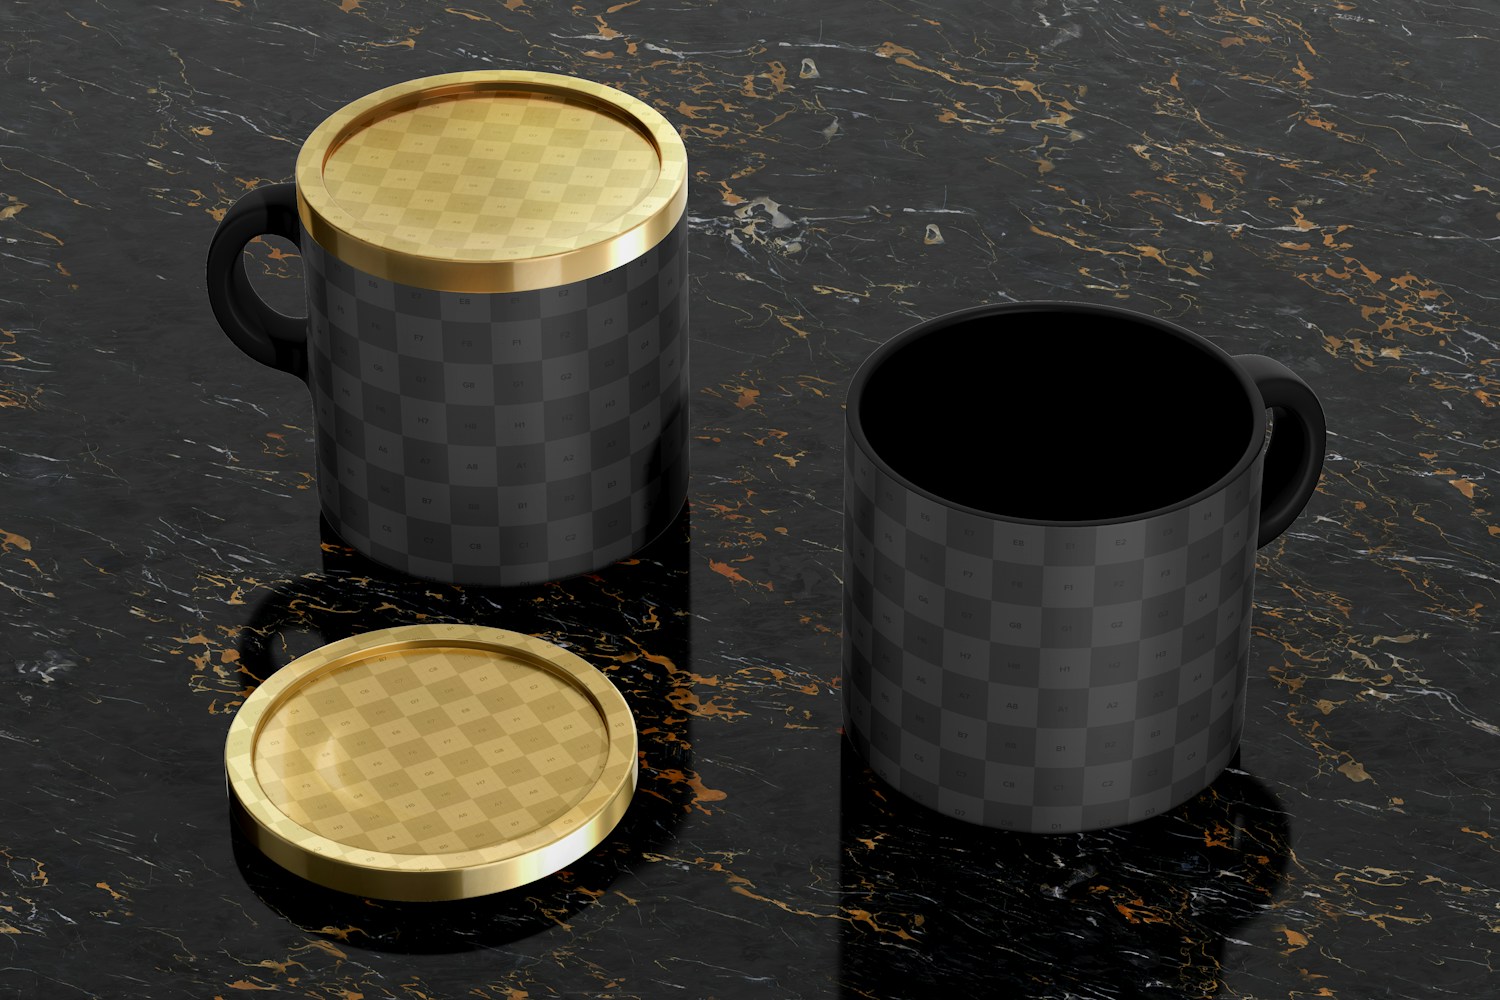 Luxury Ceramic Mugs With Lid Mockup, Perspective